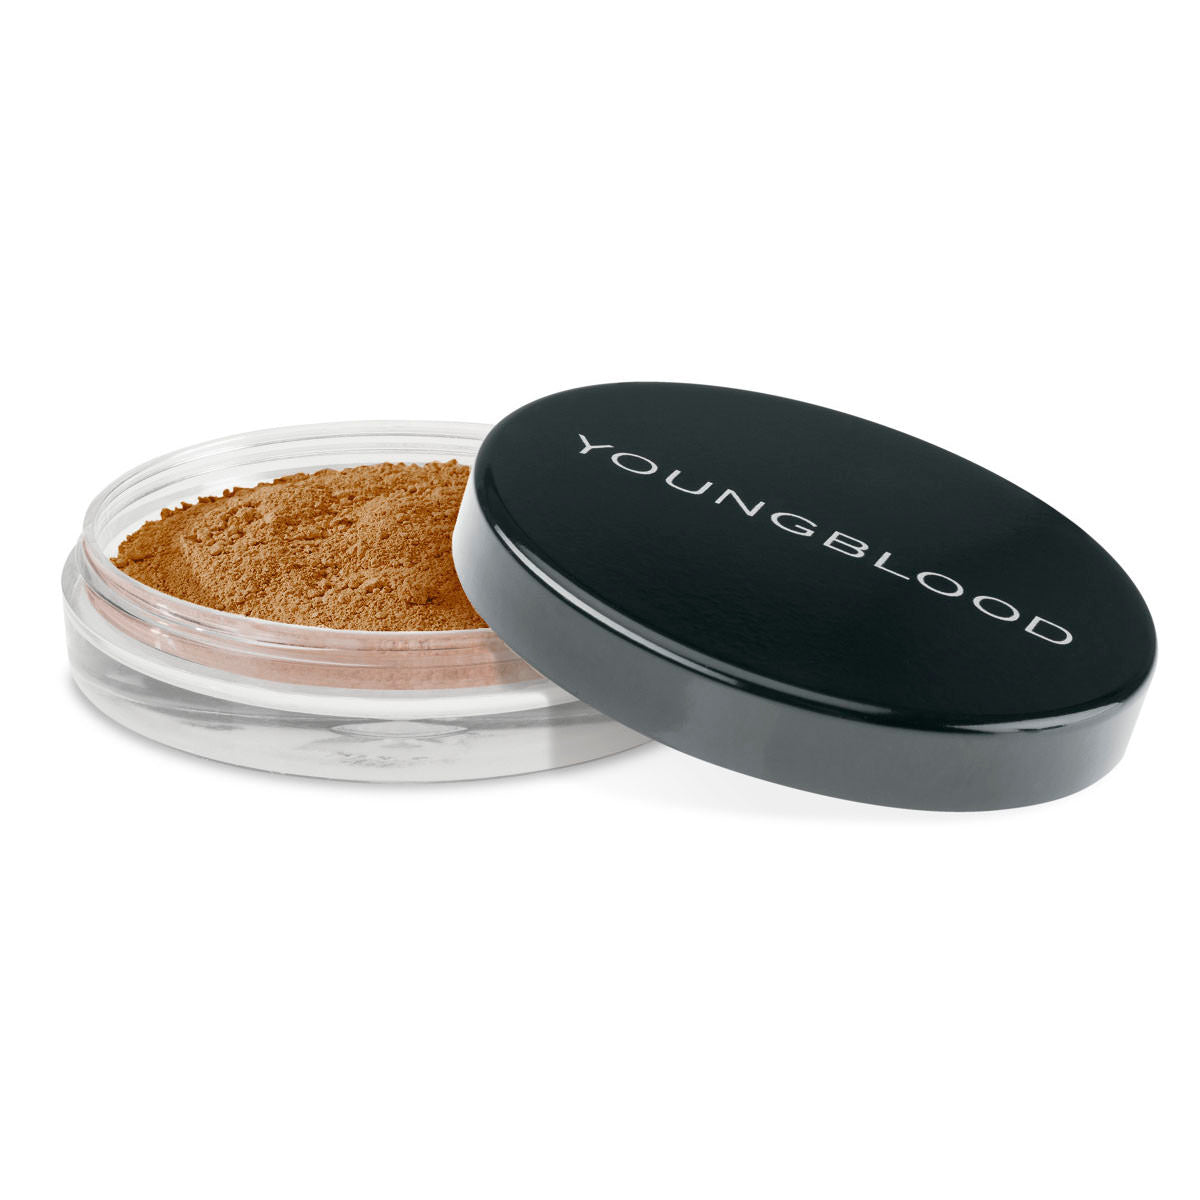 Loose Natural Mineral Foundation - Youngblood Mineral Cosmetics